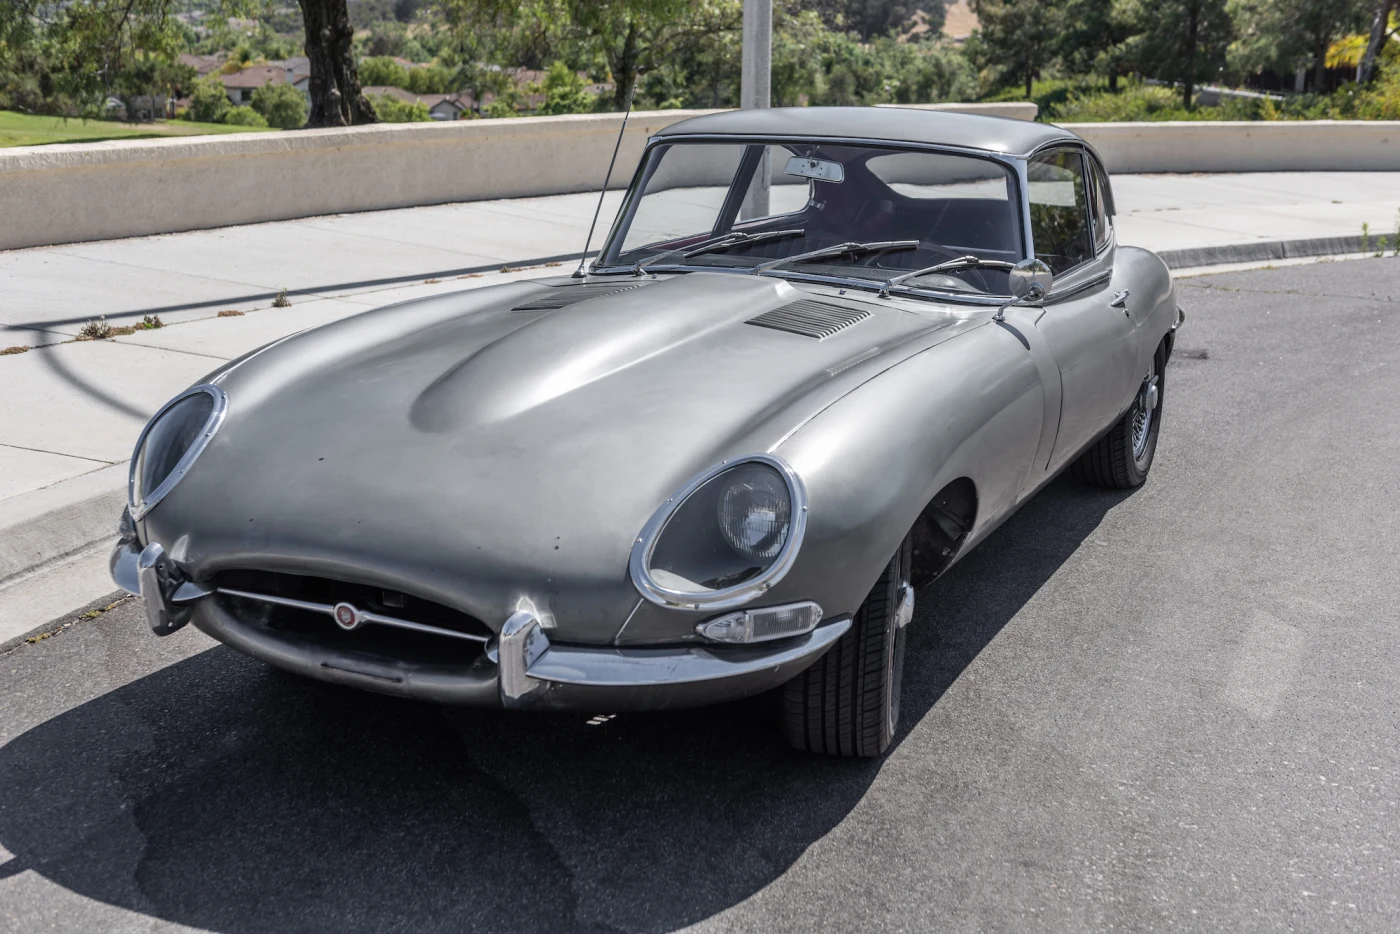 Protecting And Preserving An Icon - 1966 Jaguar E-type Splash